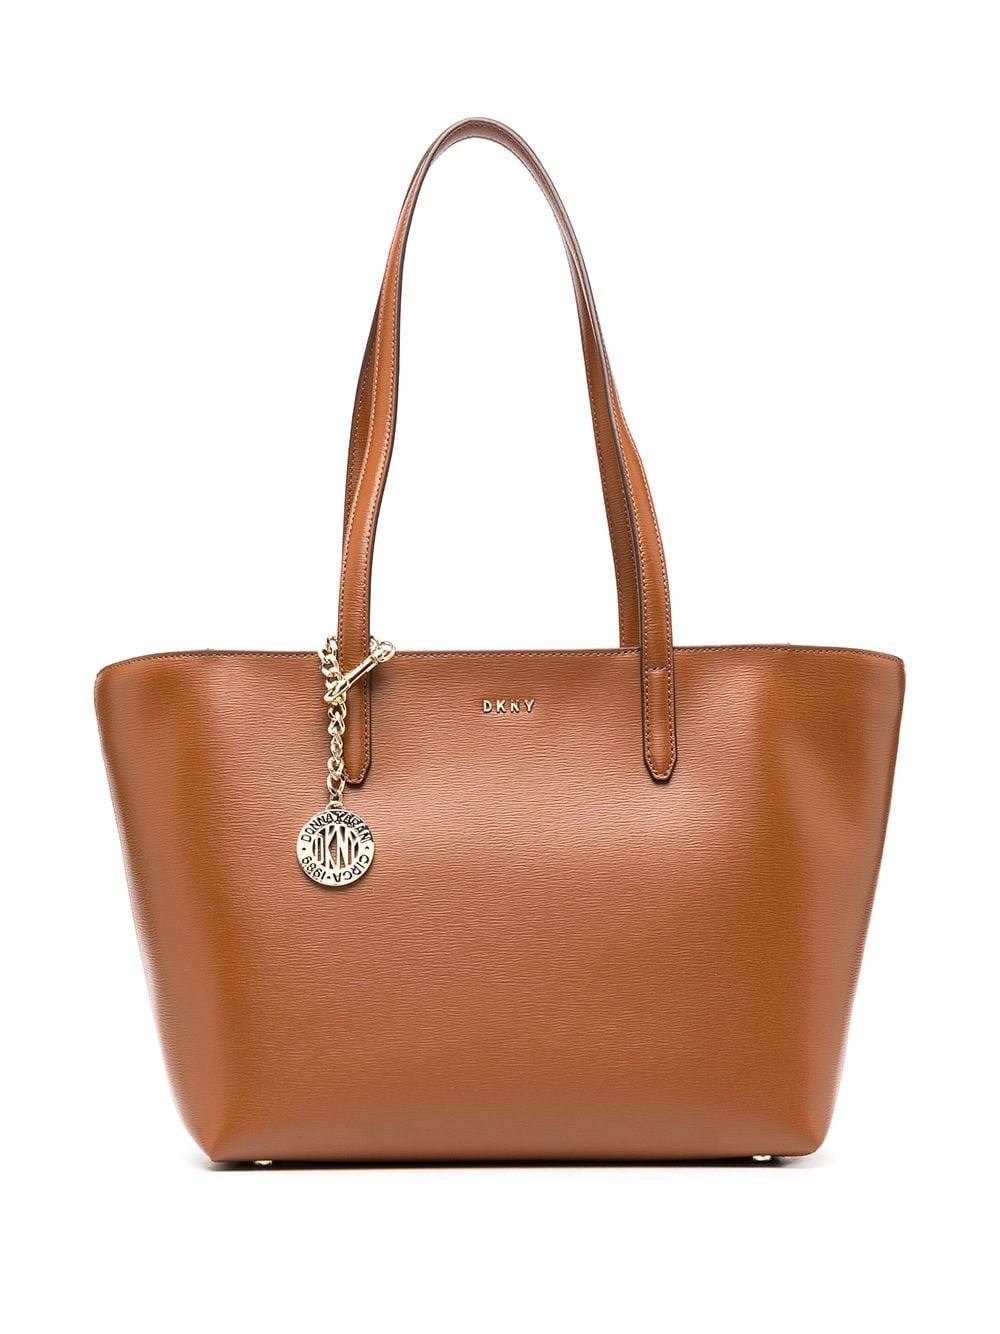 DKNY Leather Bryant Tote Bag in Brown - Save 22% - Lyst